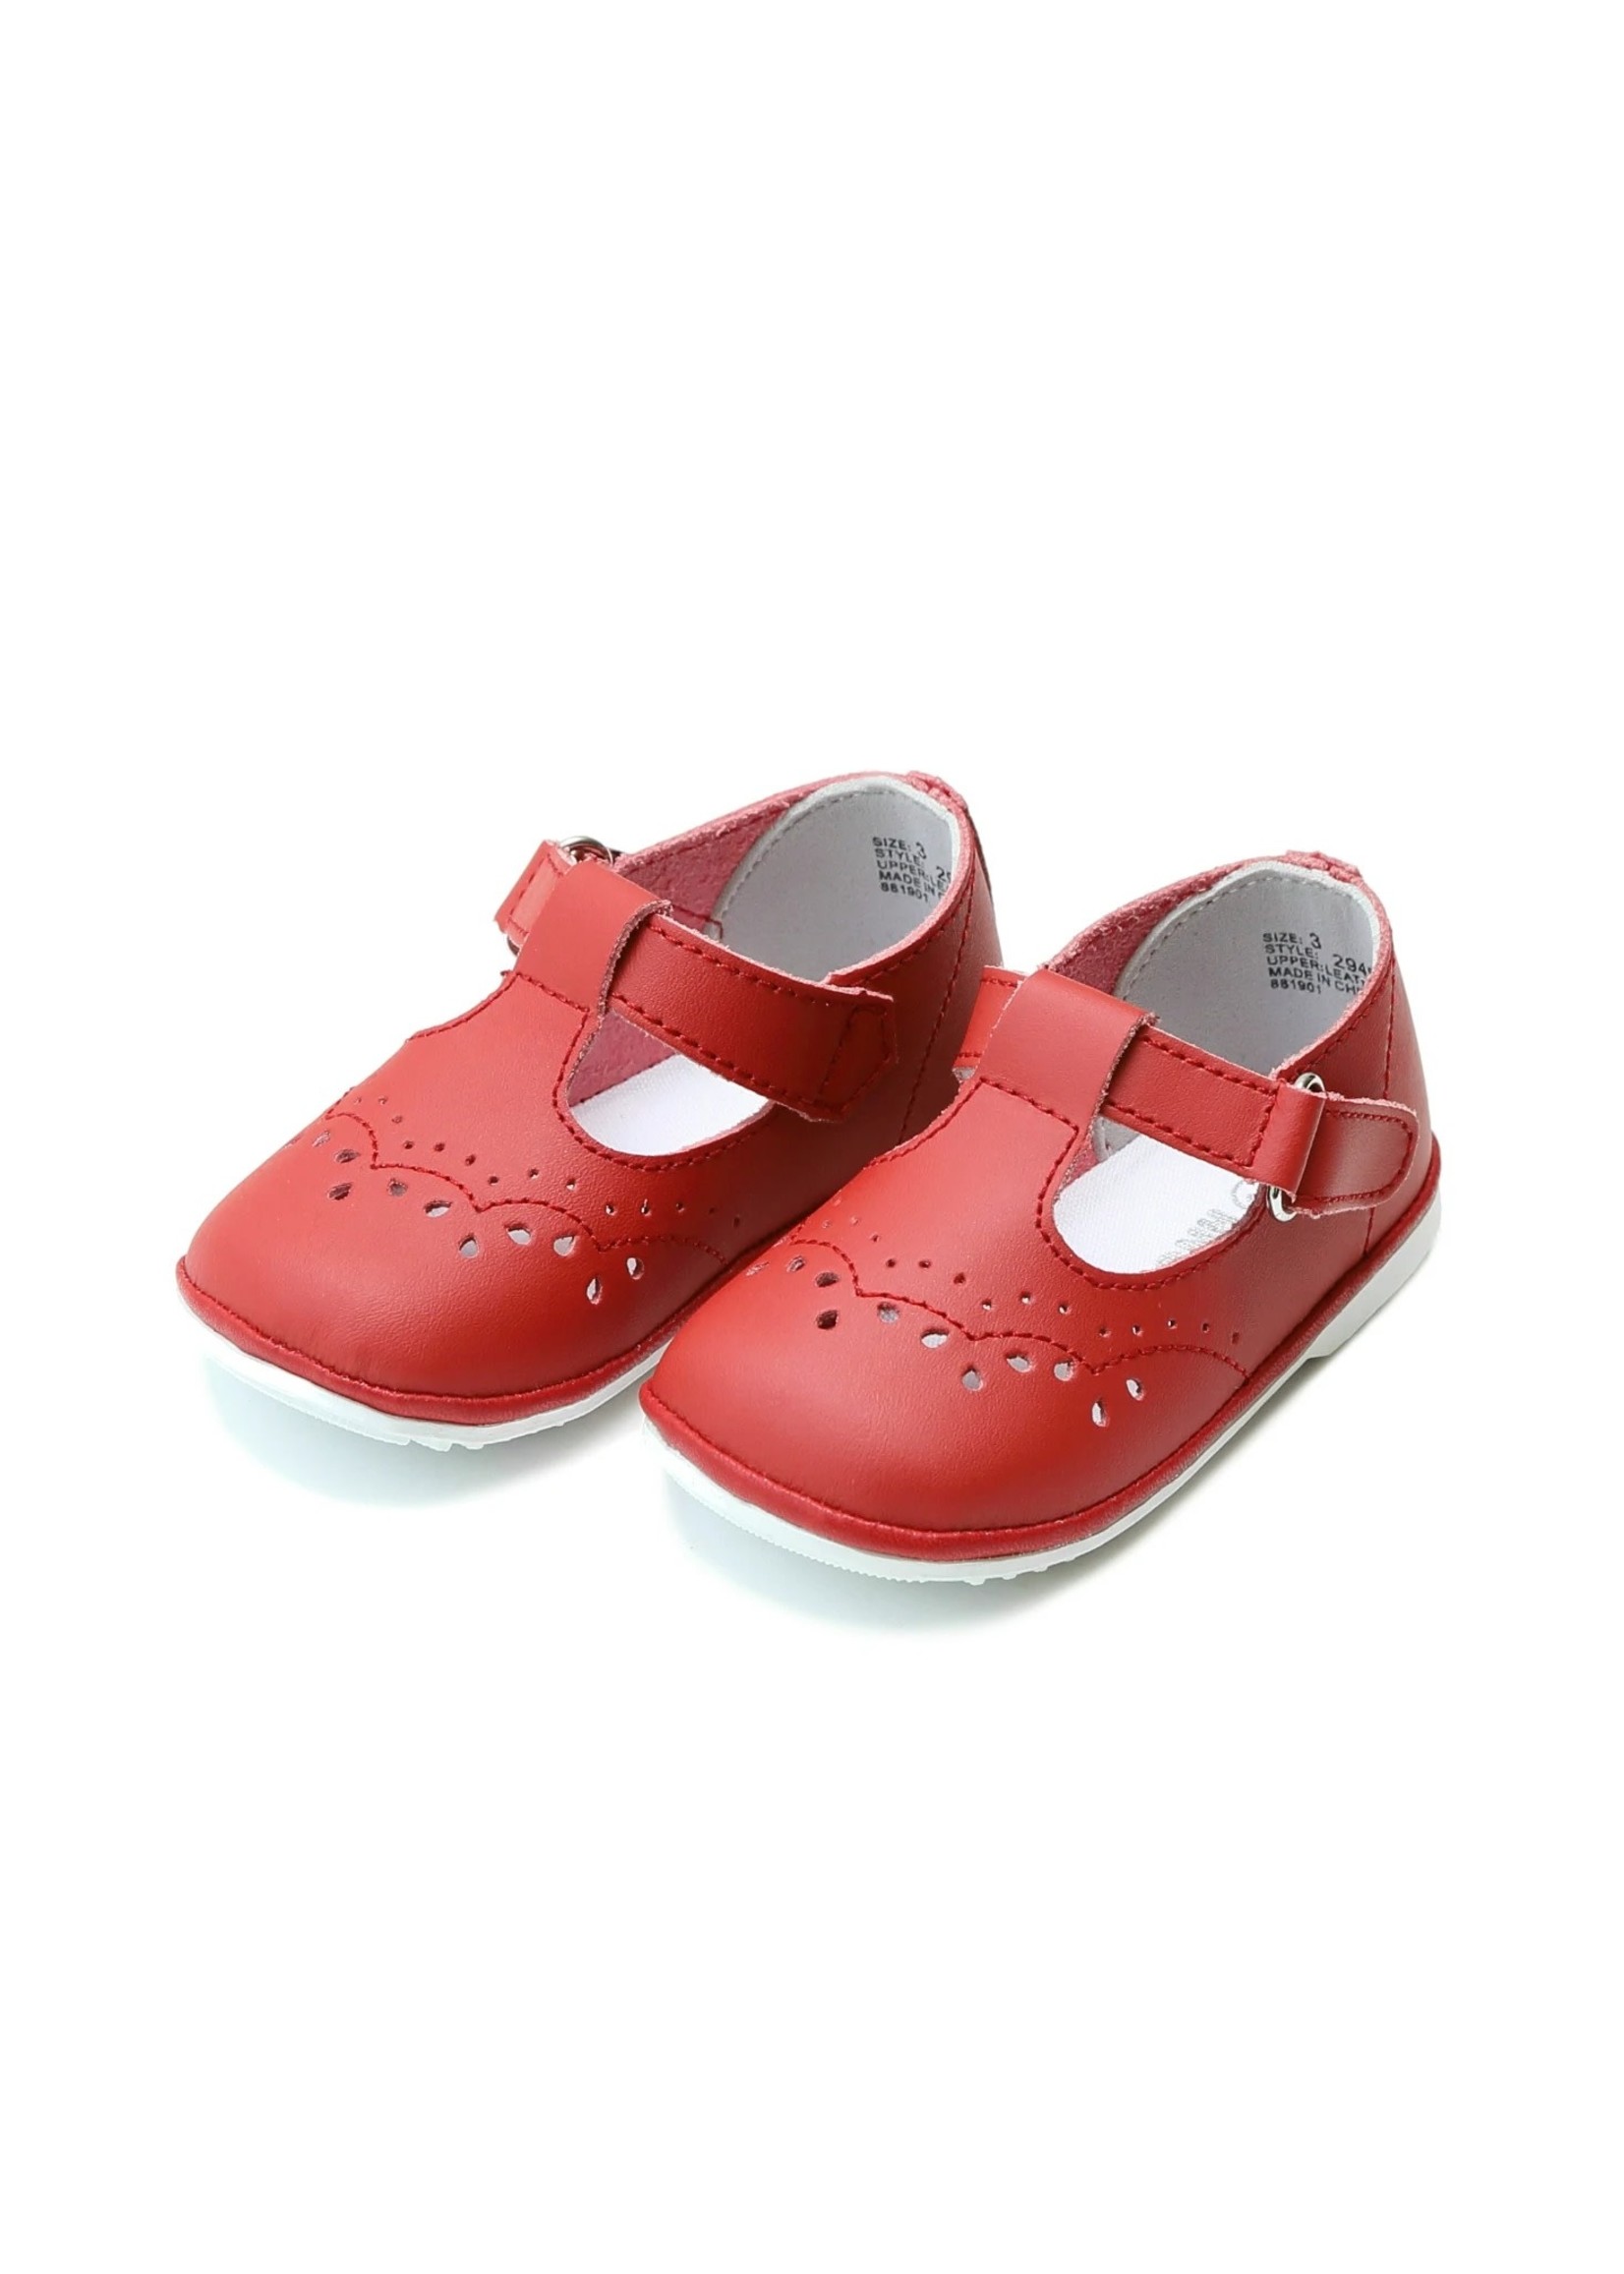 Angel Baby Shoes Red T-Strap